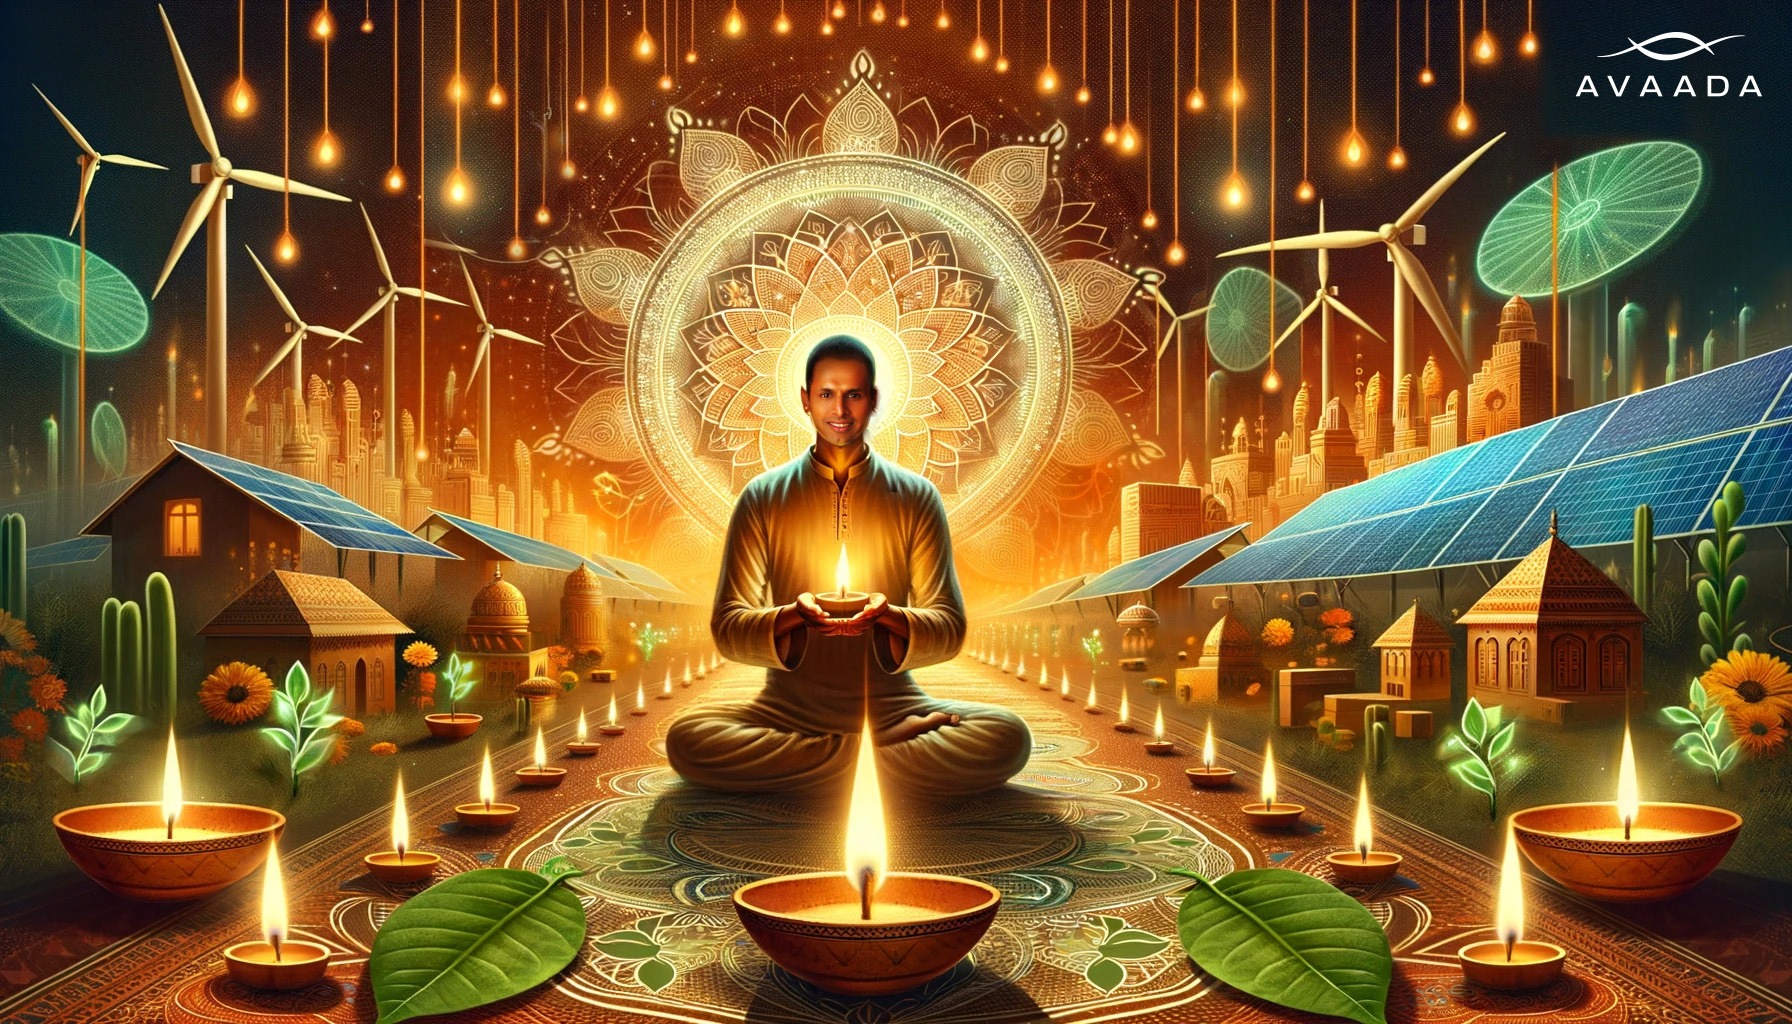 This Diwali, Ignite the Lamp of Wisdom Within